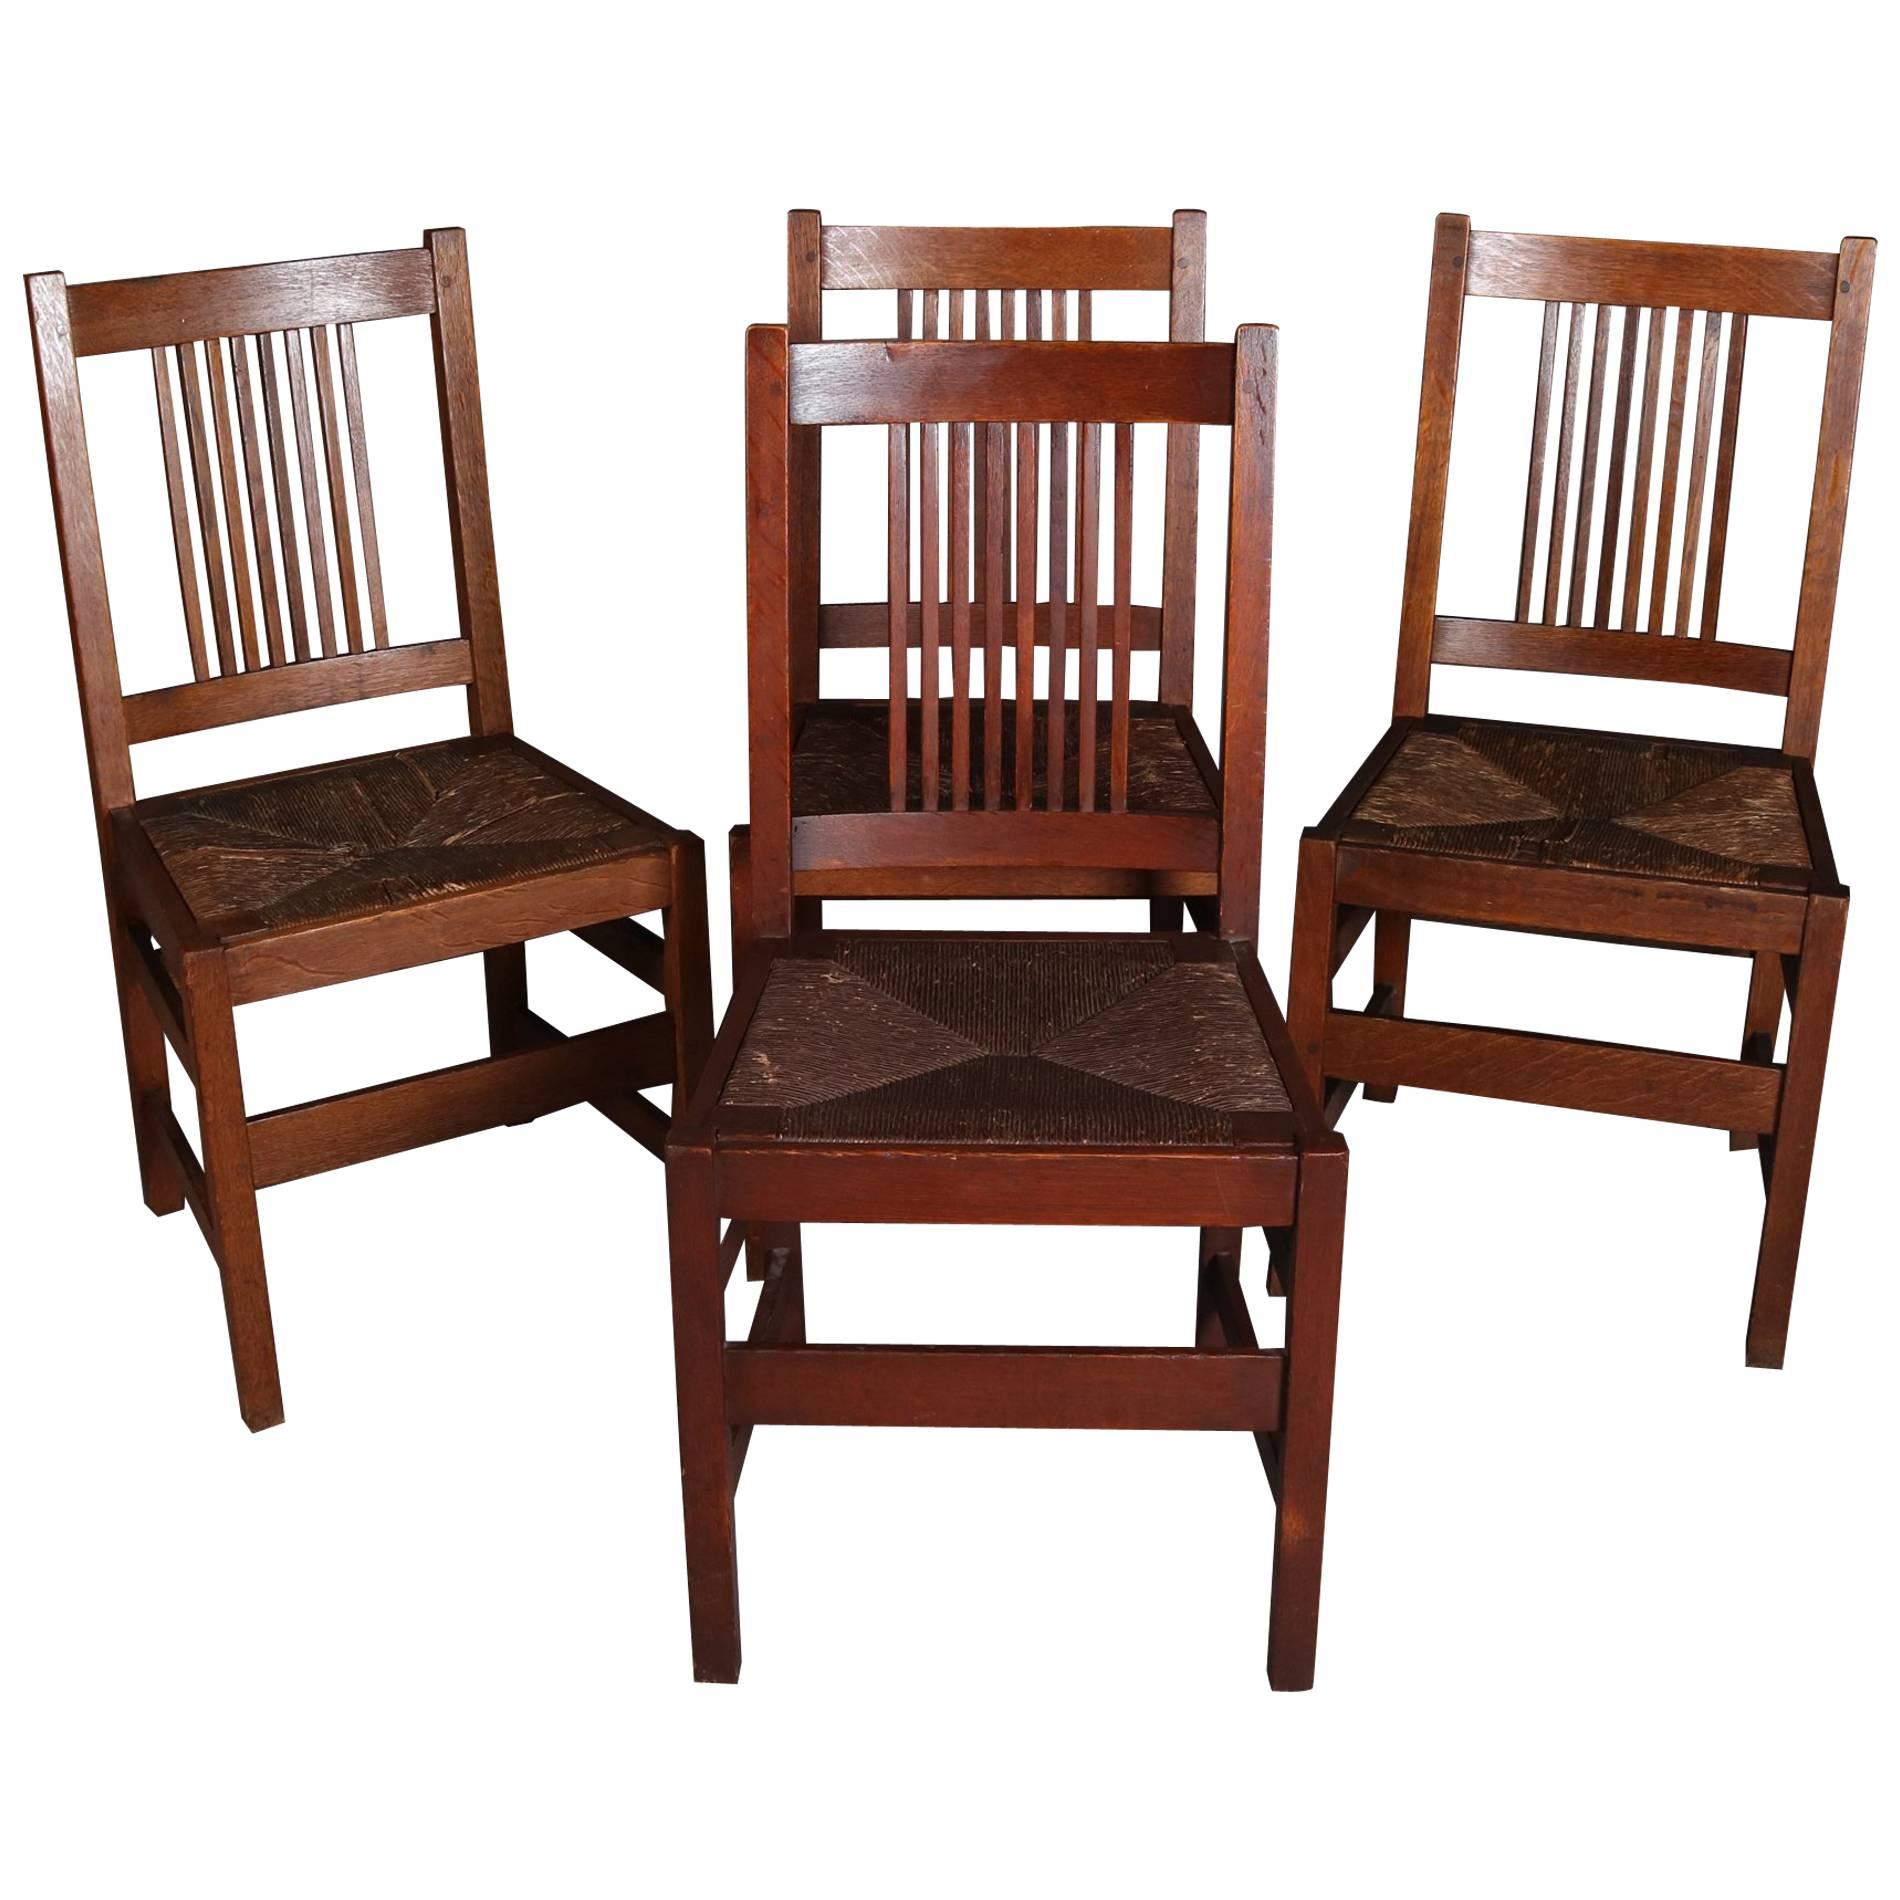 Four Arts & Crafts Mission Oak L. & J.G. Stickley Spindle Chairs, 20th Century